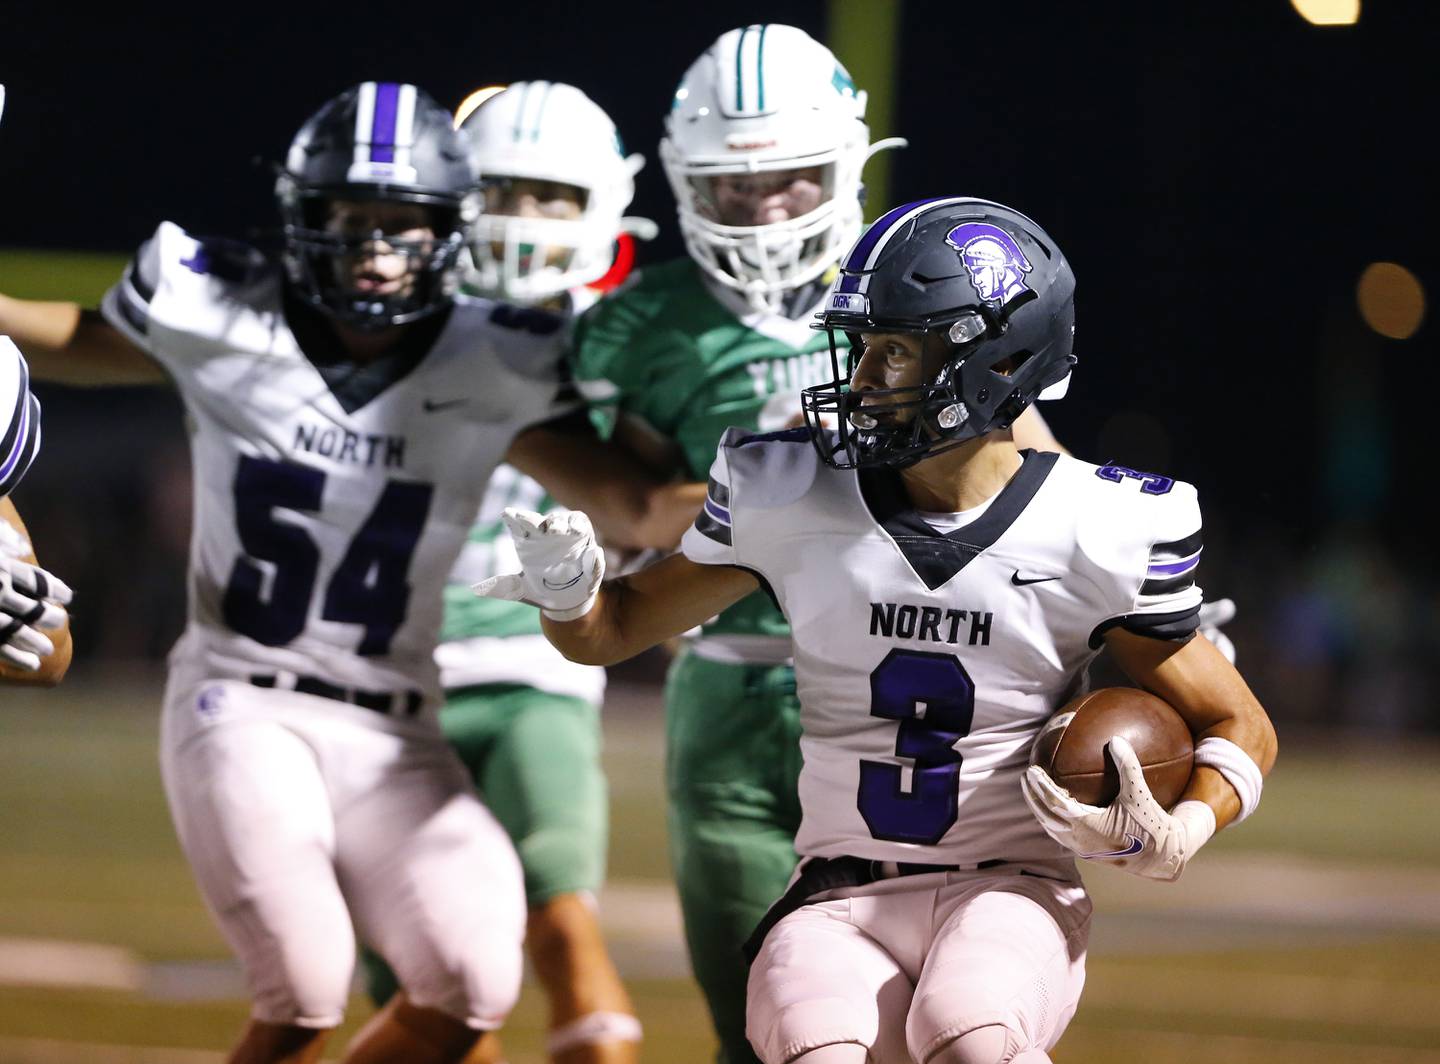 Downers Grove North's Ethan Thulin (3) runs back a kick during the boys varsity football game between Downers Grove North and York on Friday, Sept. 16, 2022 in Elmhurst, IL.